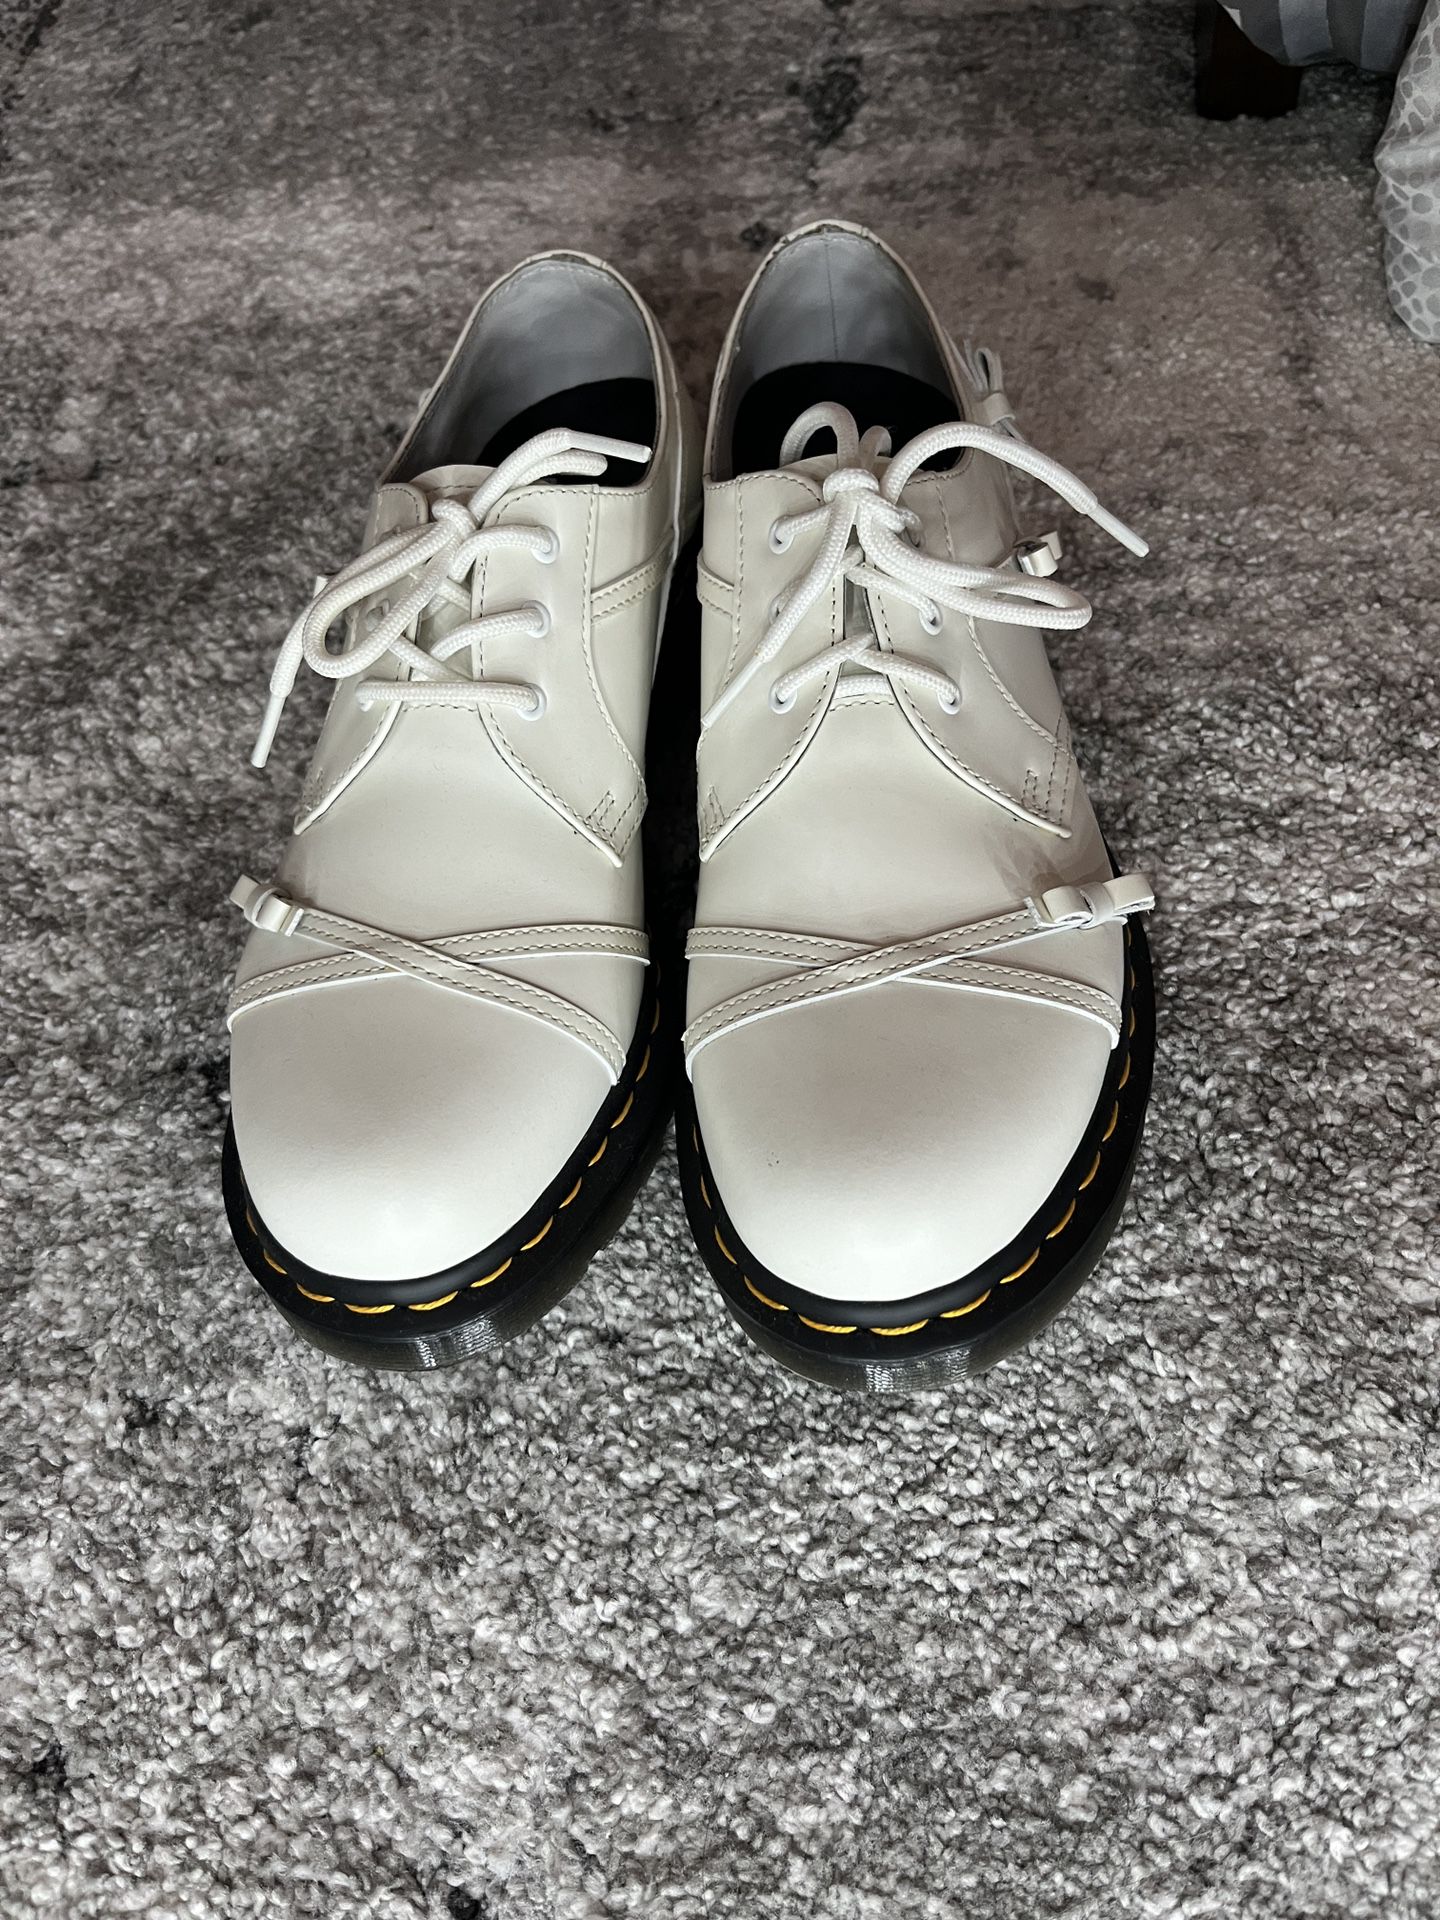 Dr. Martens 1461 Bow Smooth White Leather Oxford Shoes 